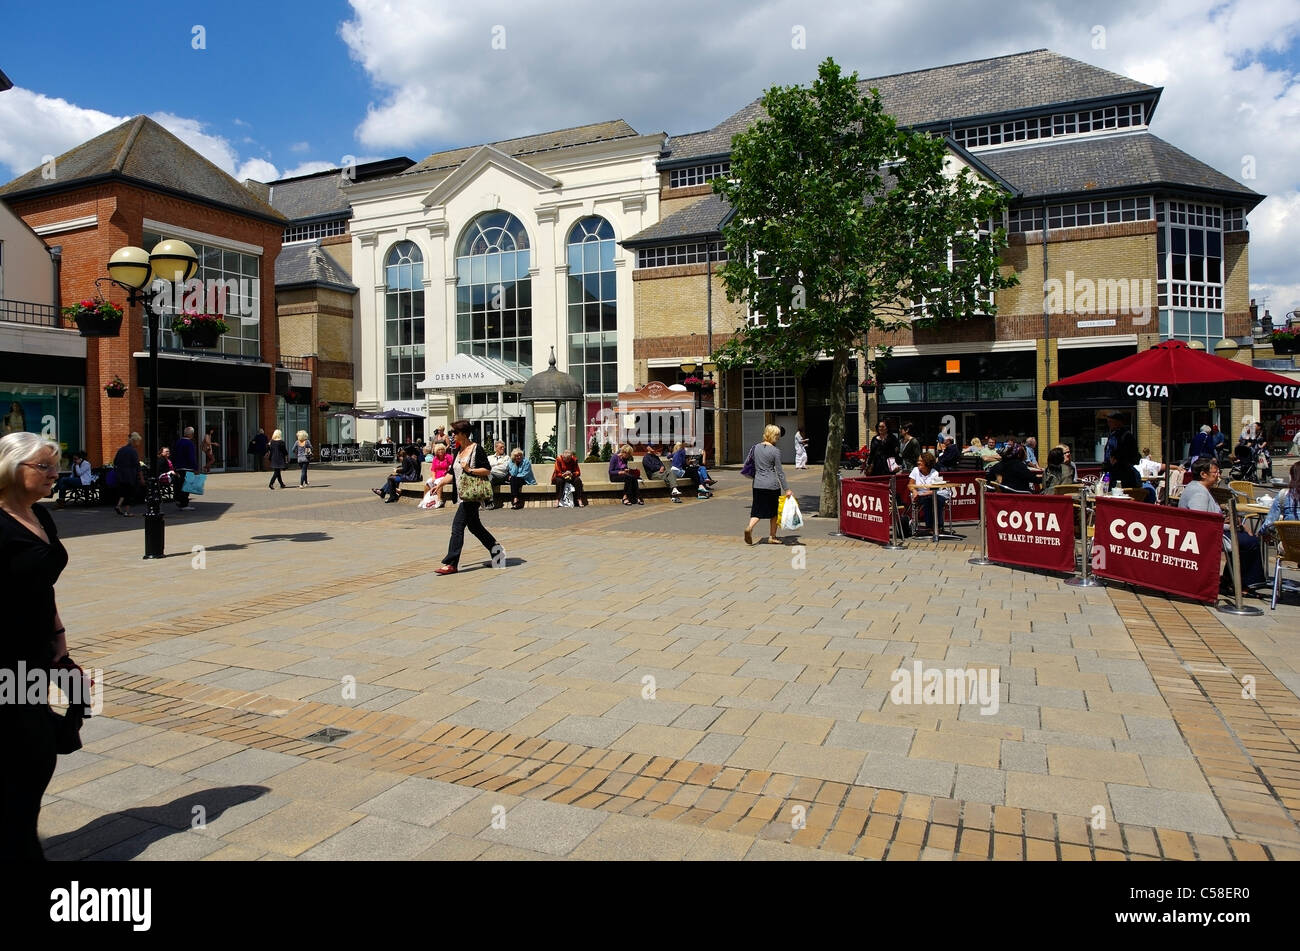 Shopping area in the centre of Colchester with the usual branded shops like Debenhams and Costa Coffee Stock Photo